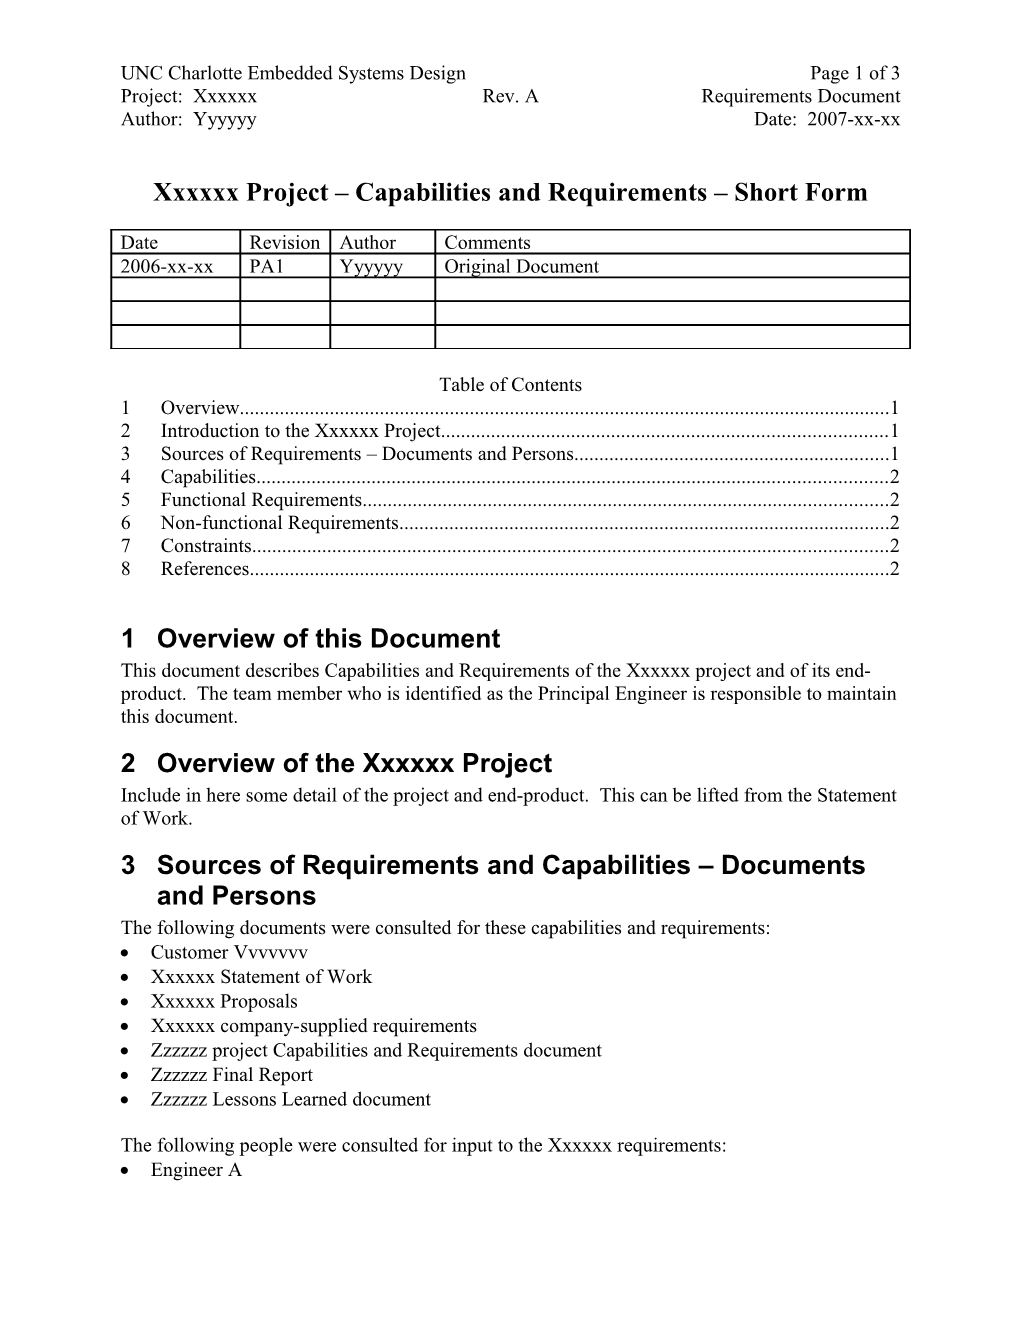 Xxxxxx Project Capabilities and Requirements